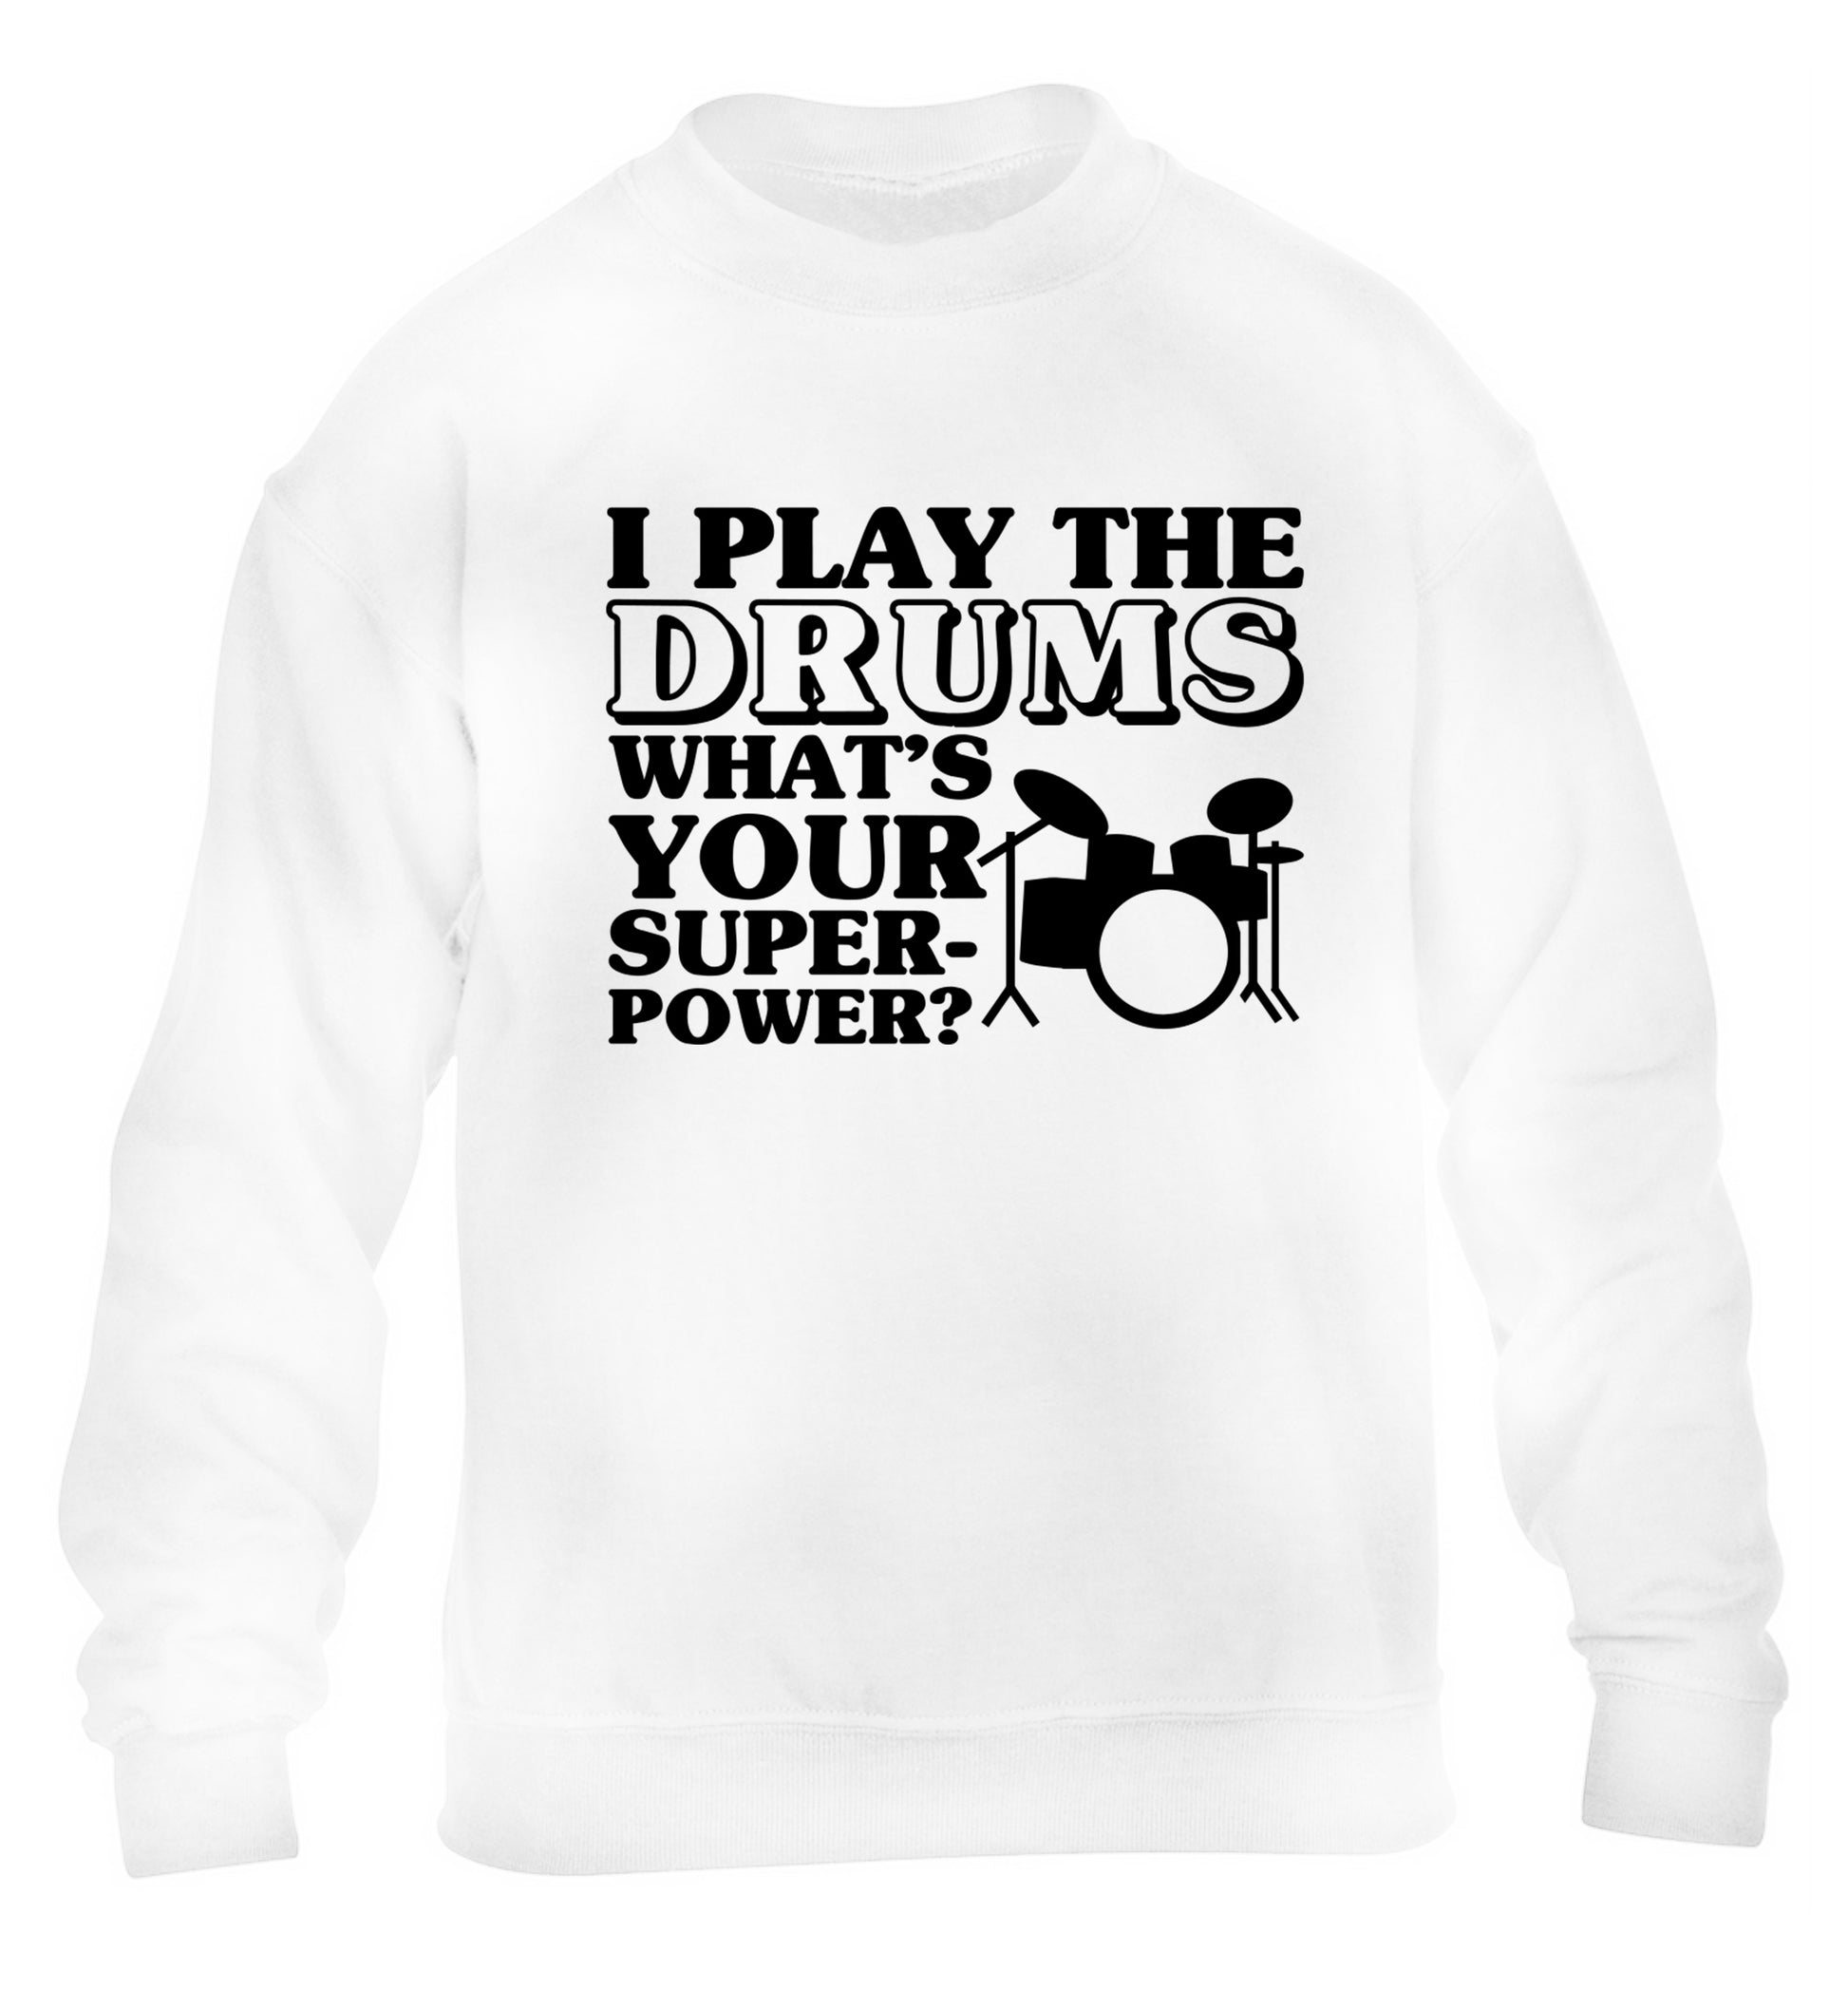 I play the drums what's your superpower? children's white sweater 12-14 Years